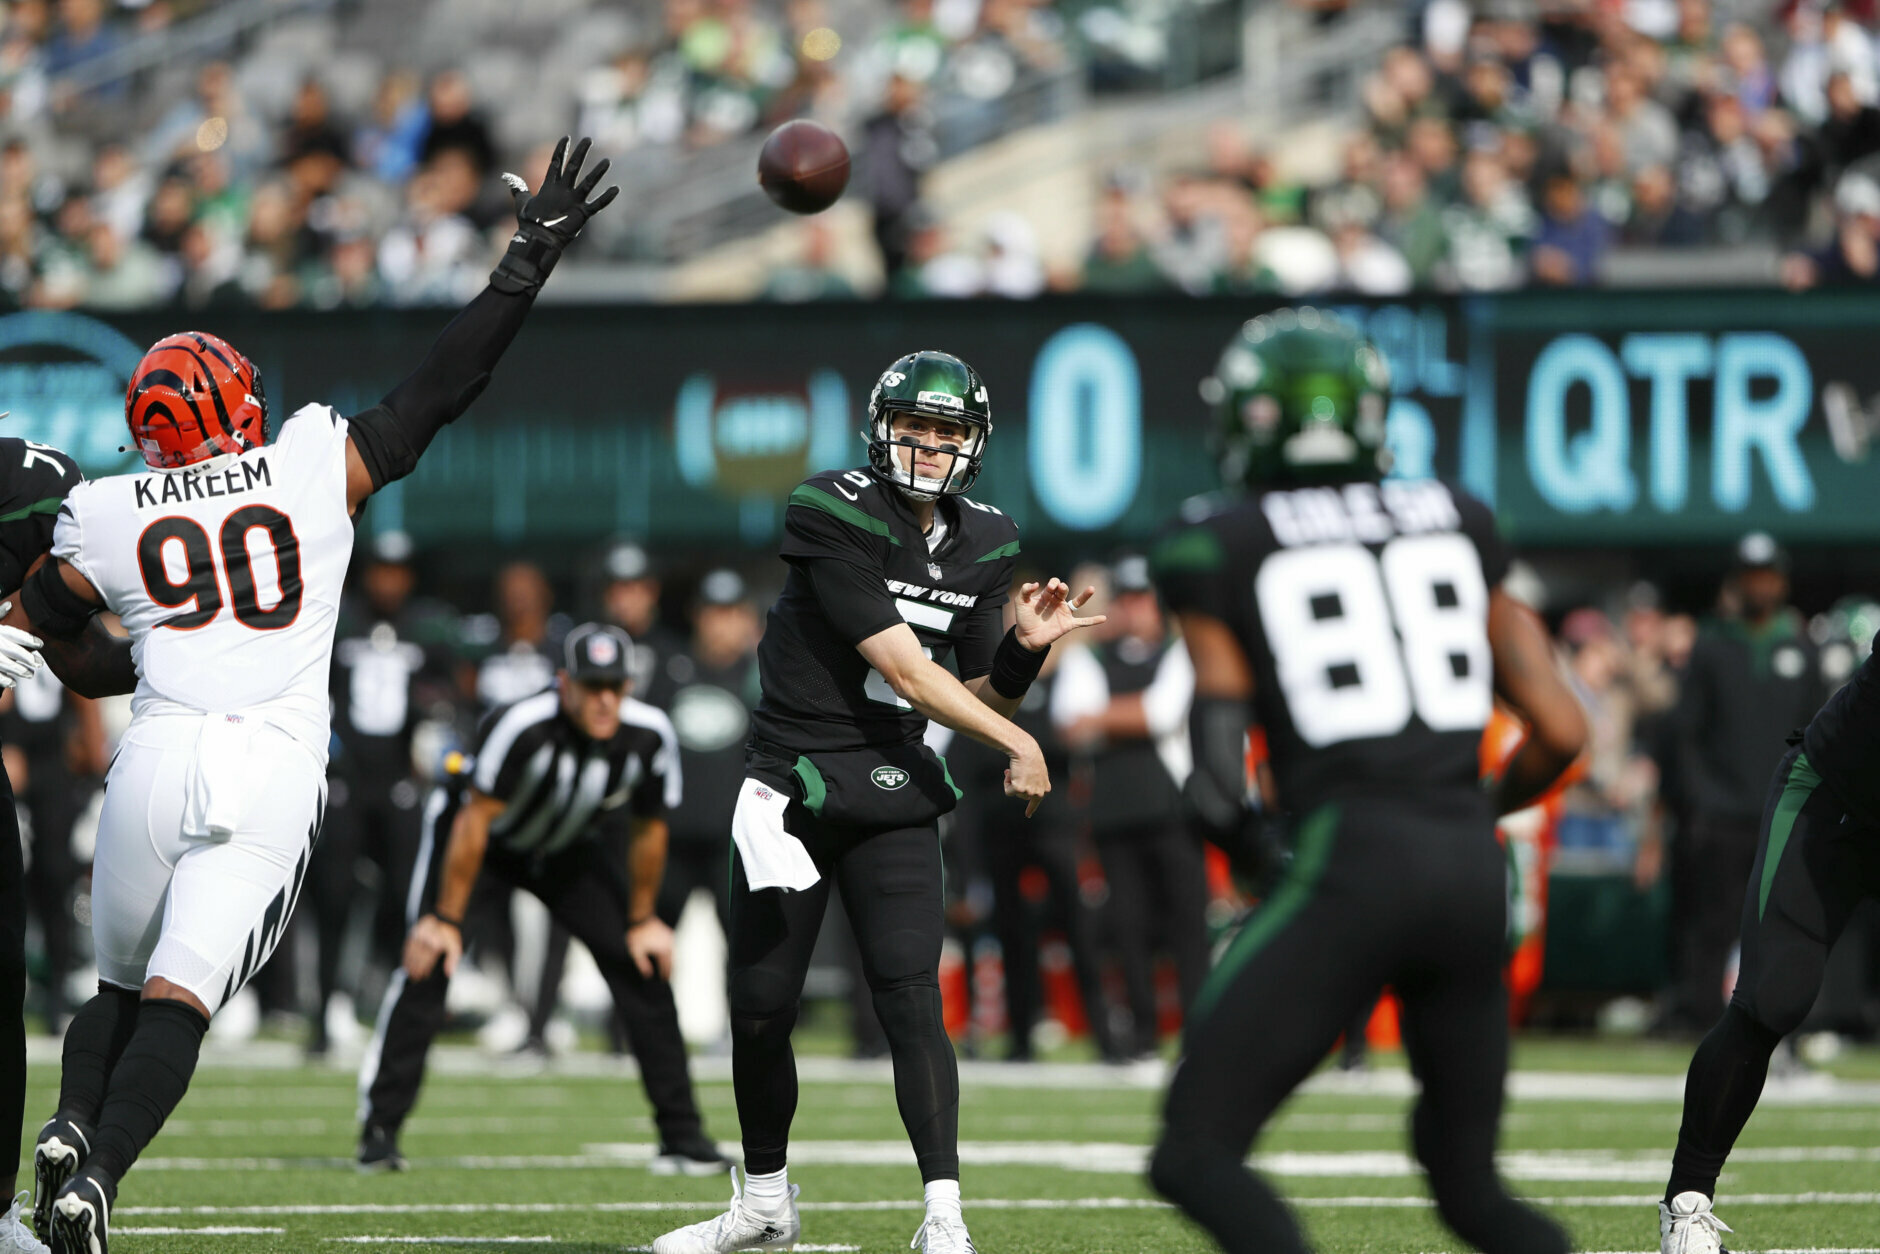 <p><b><i>Bengals 31</i></b><br />
<b><i>Jets 34</i></b></p>
<p>Who the hell is Mike White?</p>
<p>Well, he&#8217;s now the only quarterback since 1950 to throw for 400 yards and three touchdowns in his first career start — and, in the last 71 years, only Cam Newton has more passing yardage in his first career start. Maybe the Jets should include Zach Wilson if they do have <a href="https://profootballtalk.nbcsports.com/2021/10/28/robert-saleh-on-trade-deadline-were-not-looking-for-a-fire-sale/" target="_blank" rel="noopener">an &#8220;everything must go&#8221; fire sale</a>.</p>
<p>Meanwhile, in Cincinnati …</p>
<div class="video-container"><iframe loading="lazy" title="oh no! we suck again" width="500" height="375" src="https://www.youtube.com/embed/qi1LMIUOOAI?feature=oembed" frameborder="0" allow="accelerometer; autoplay; clipboard-write; encrypted-media; gyroscope; picture-in-picture" allowfullscreen></iframe></div>
